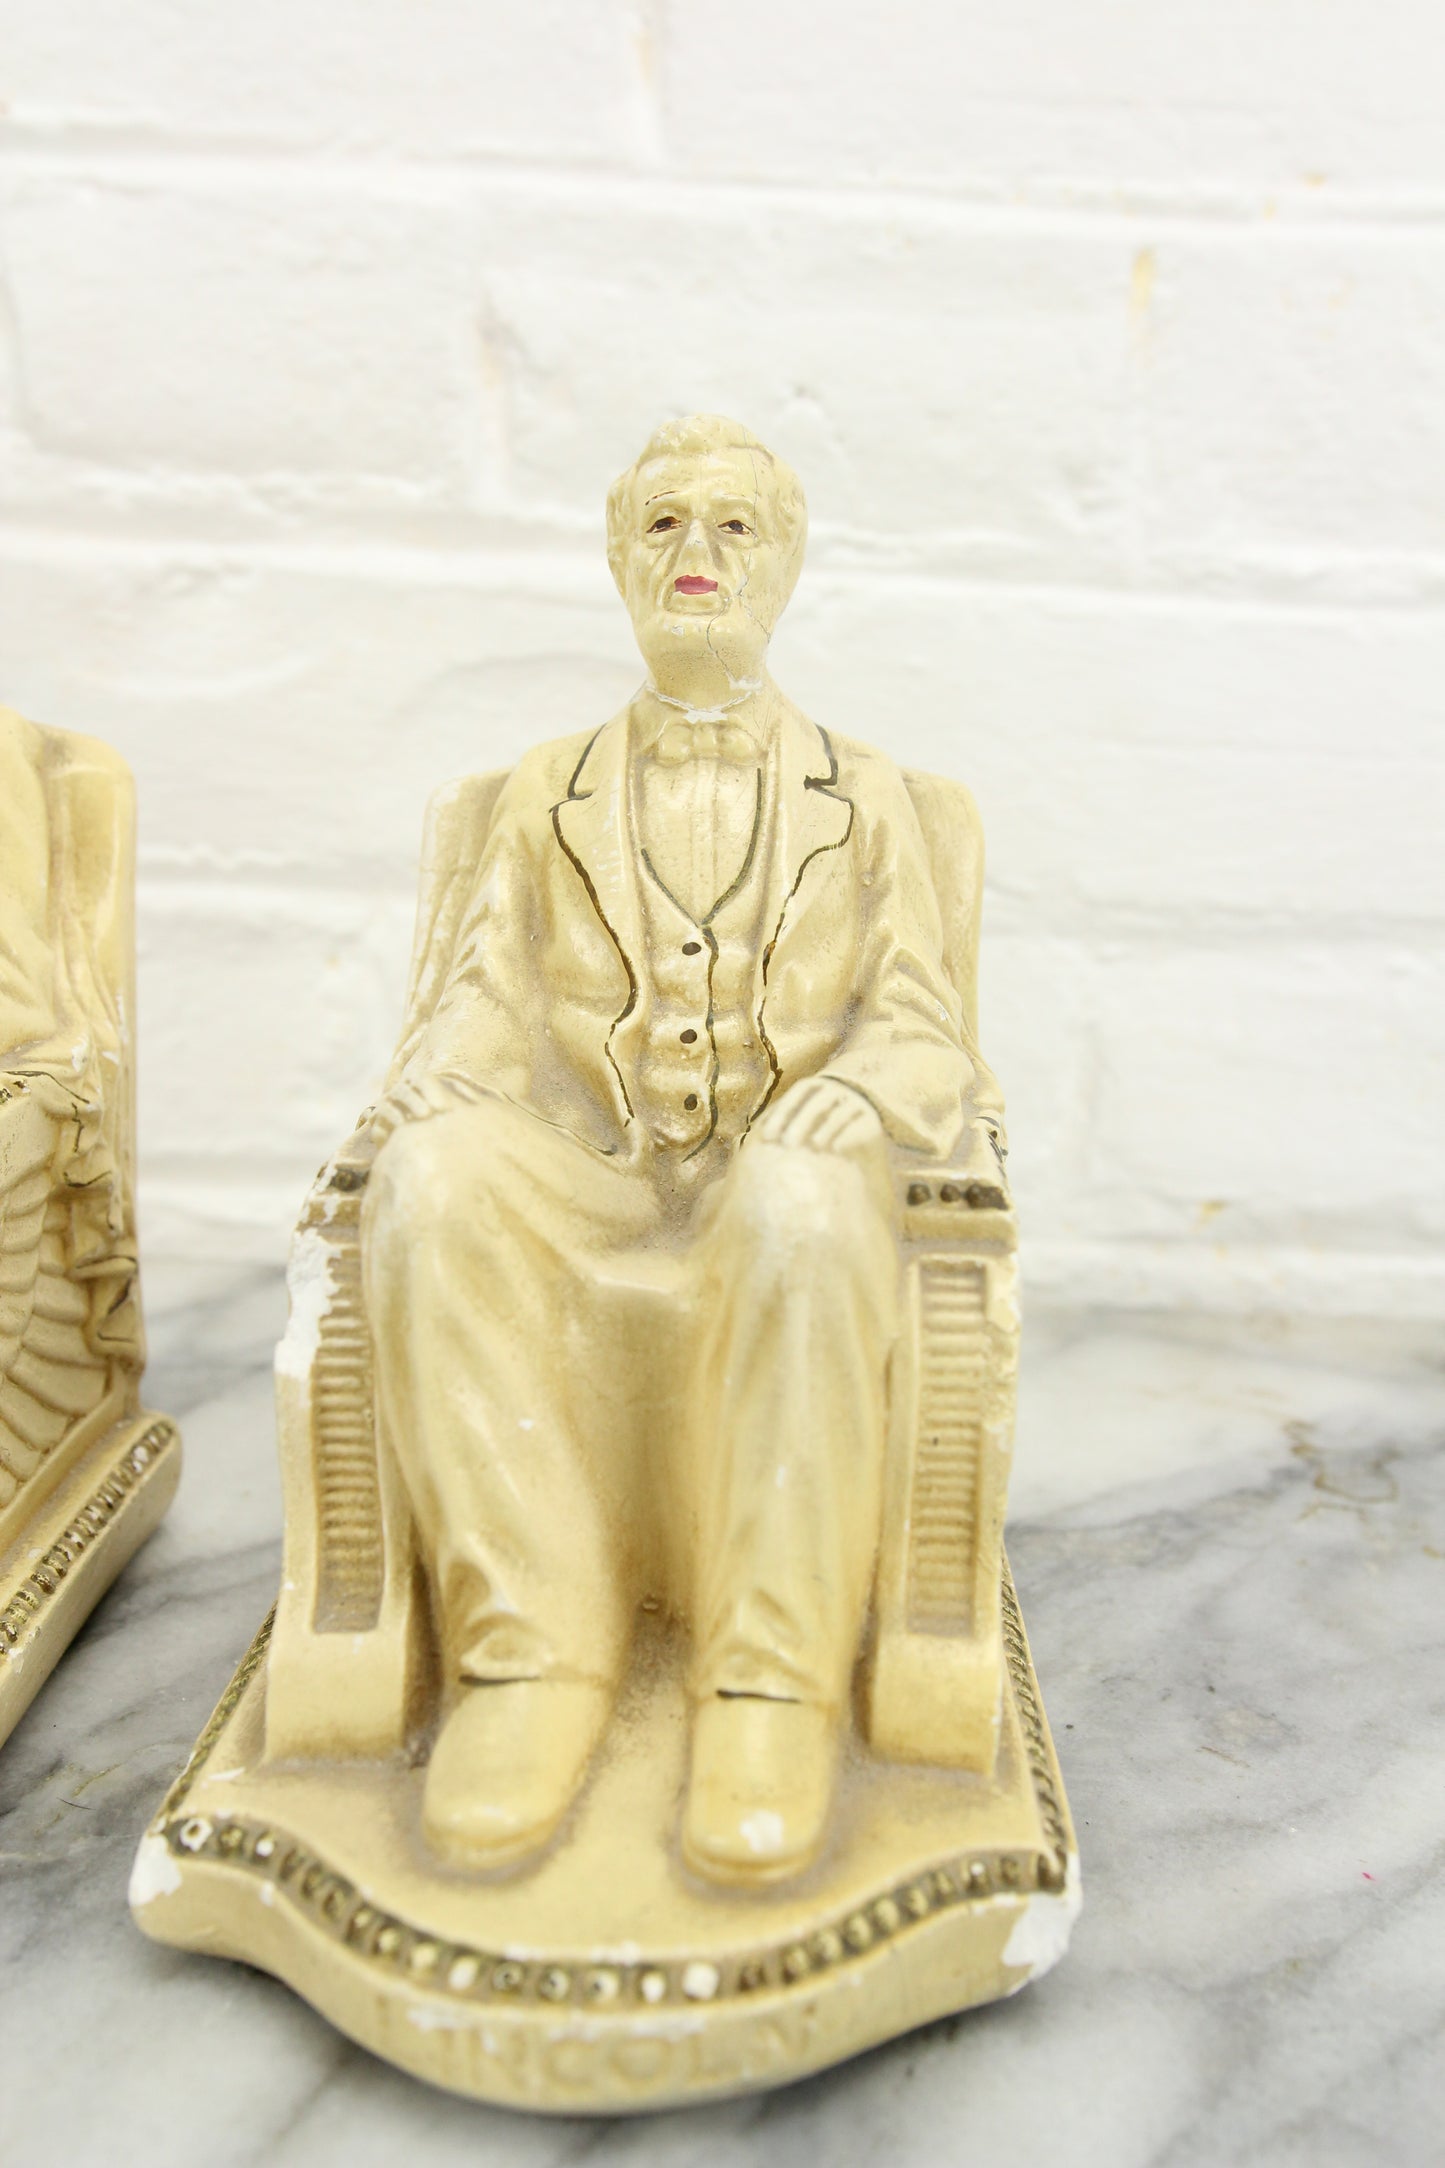 Chalkware Abraham Lincoln Bookends by Roman Art Co. Inc., 1924